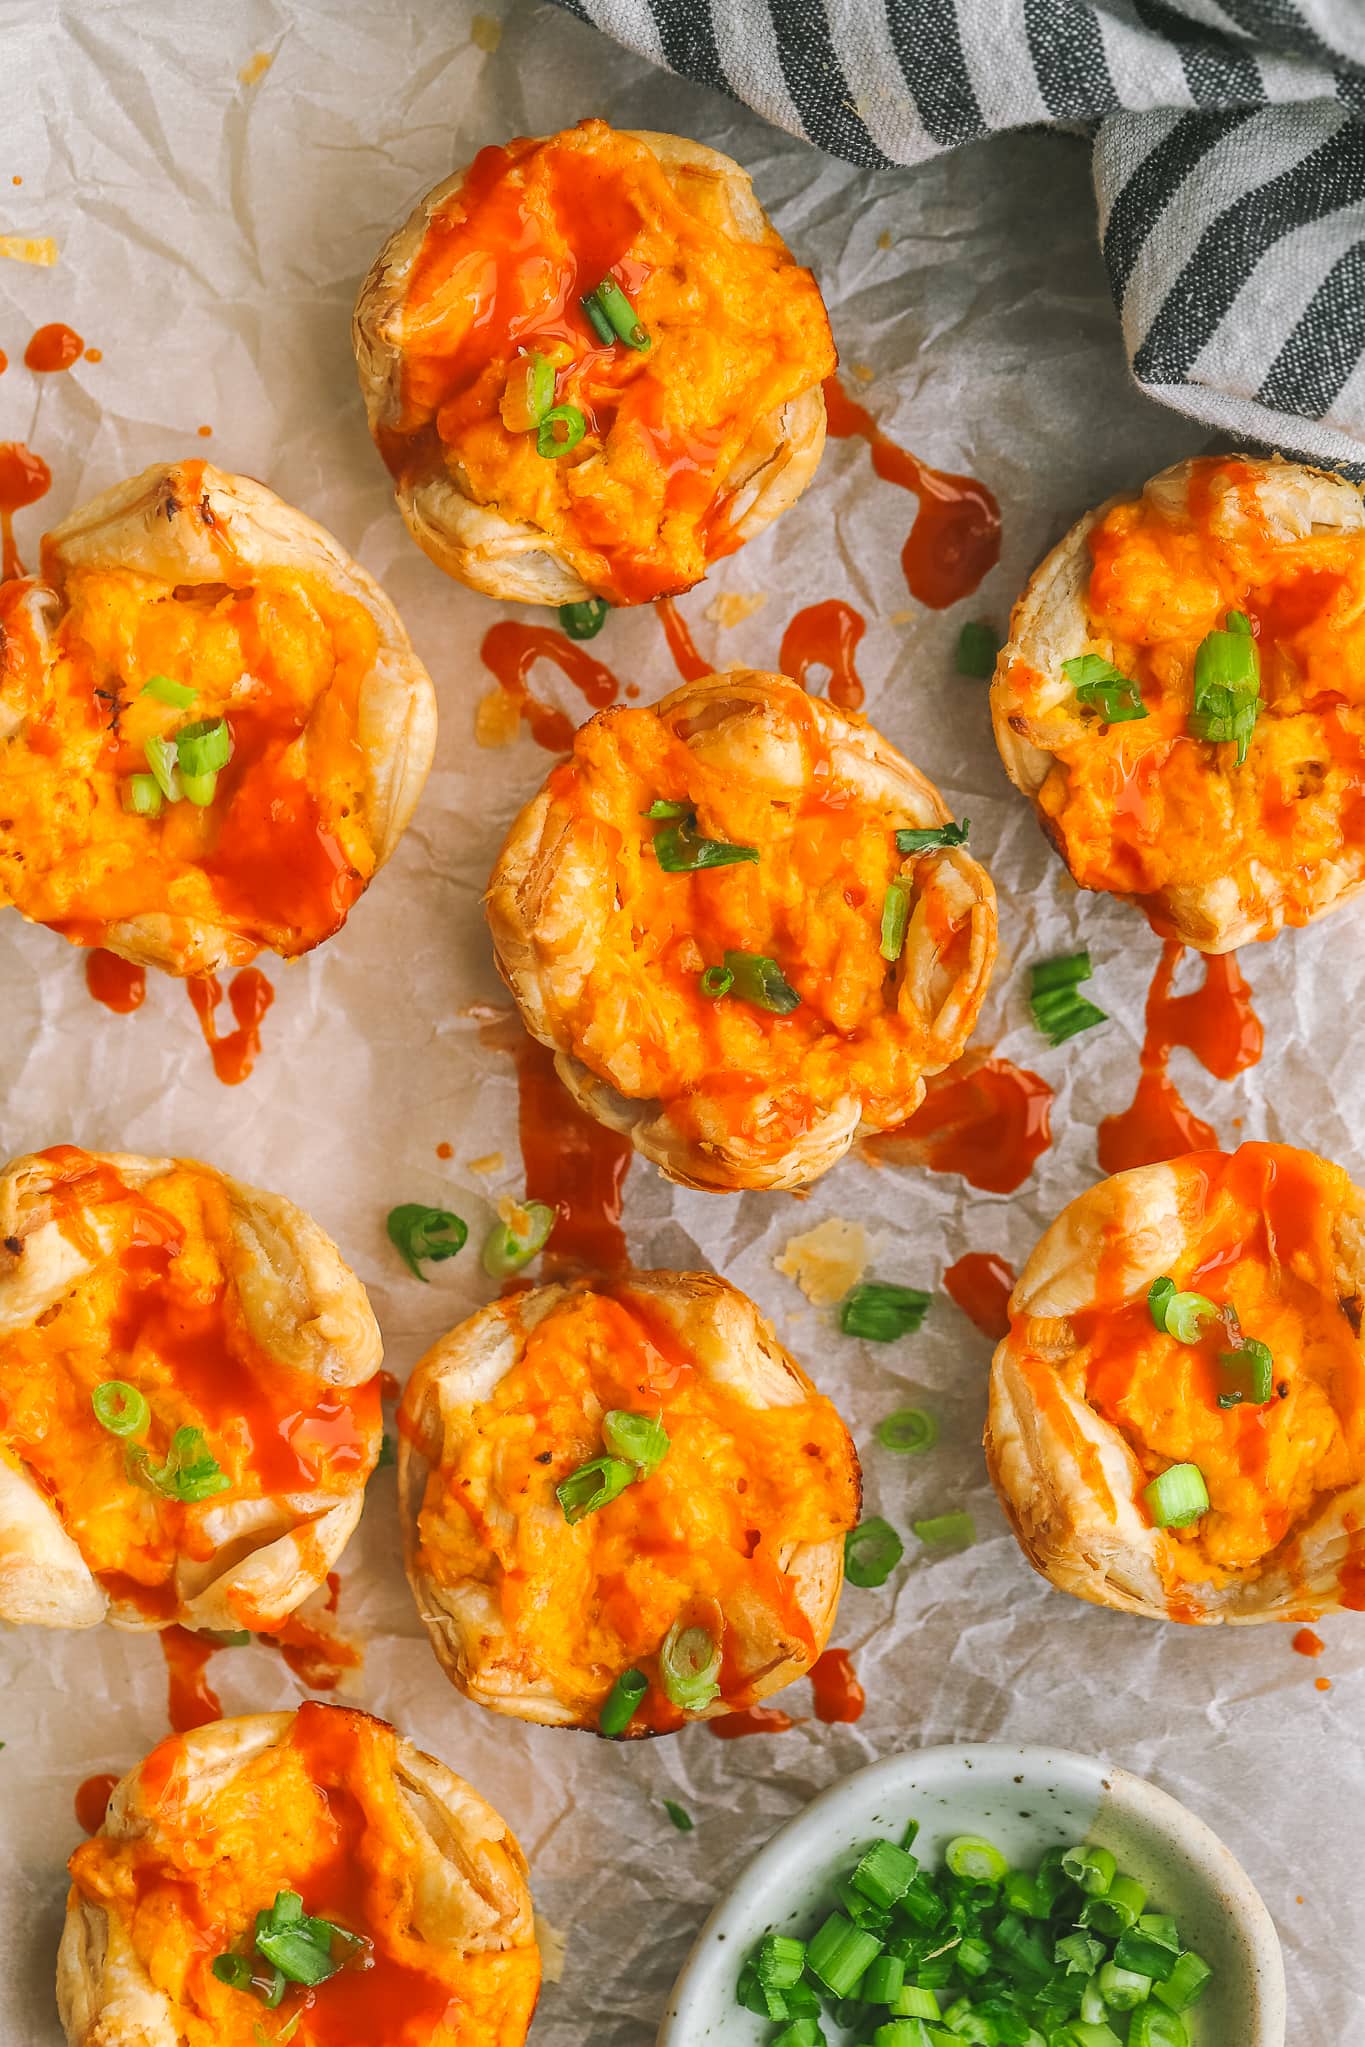 buffalo chicken bites on a serving tray drizzled with buffalo sauce